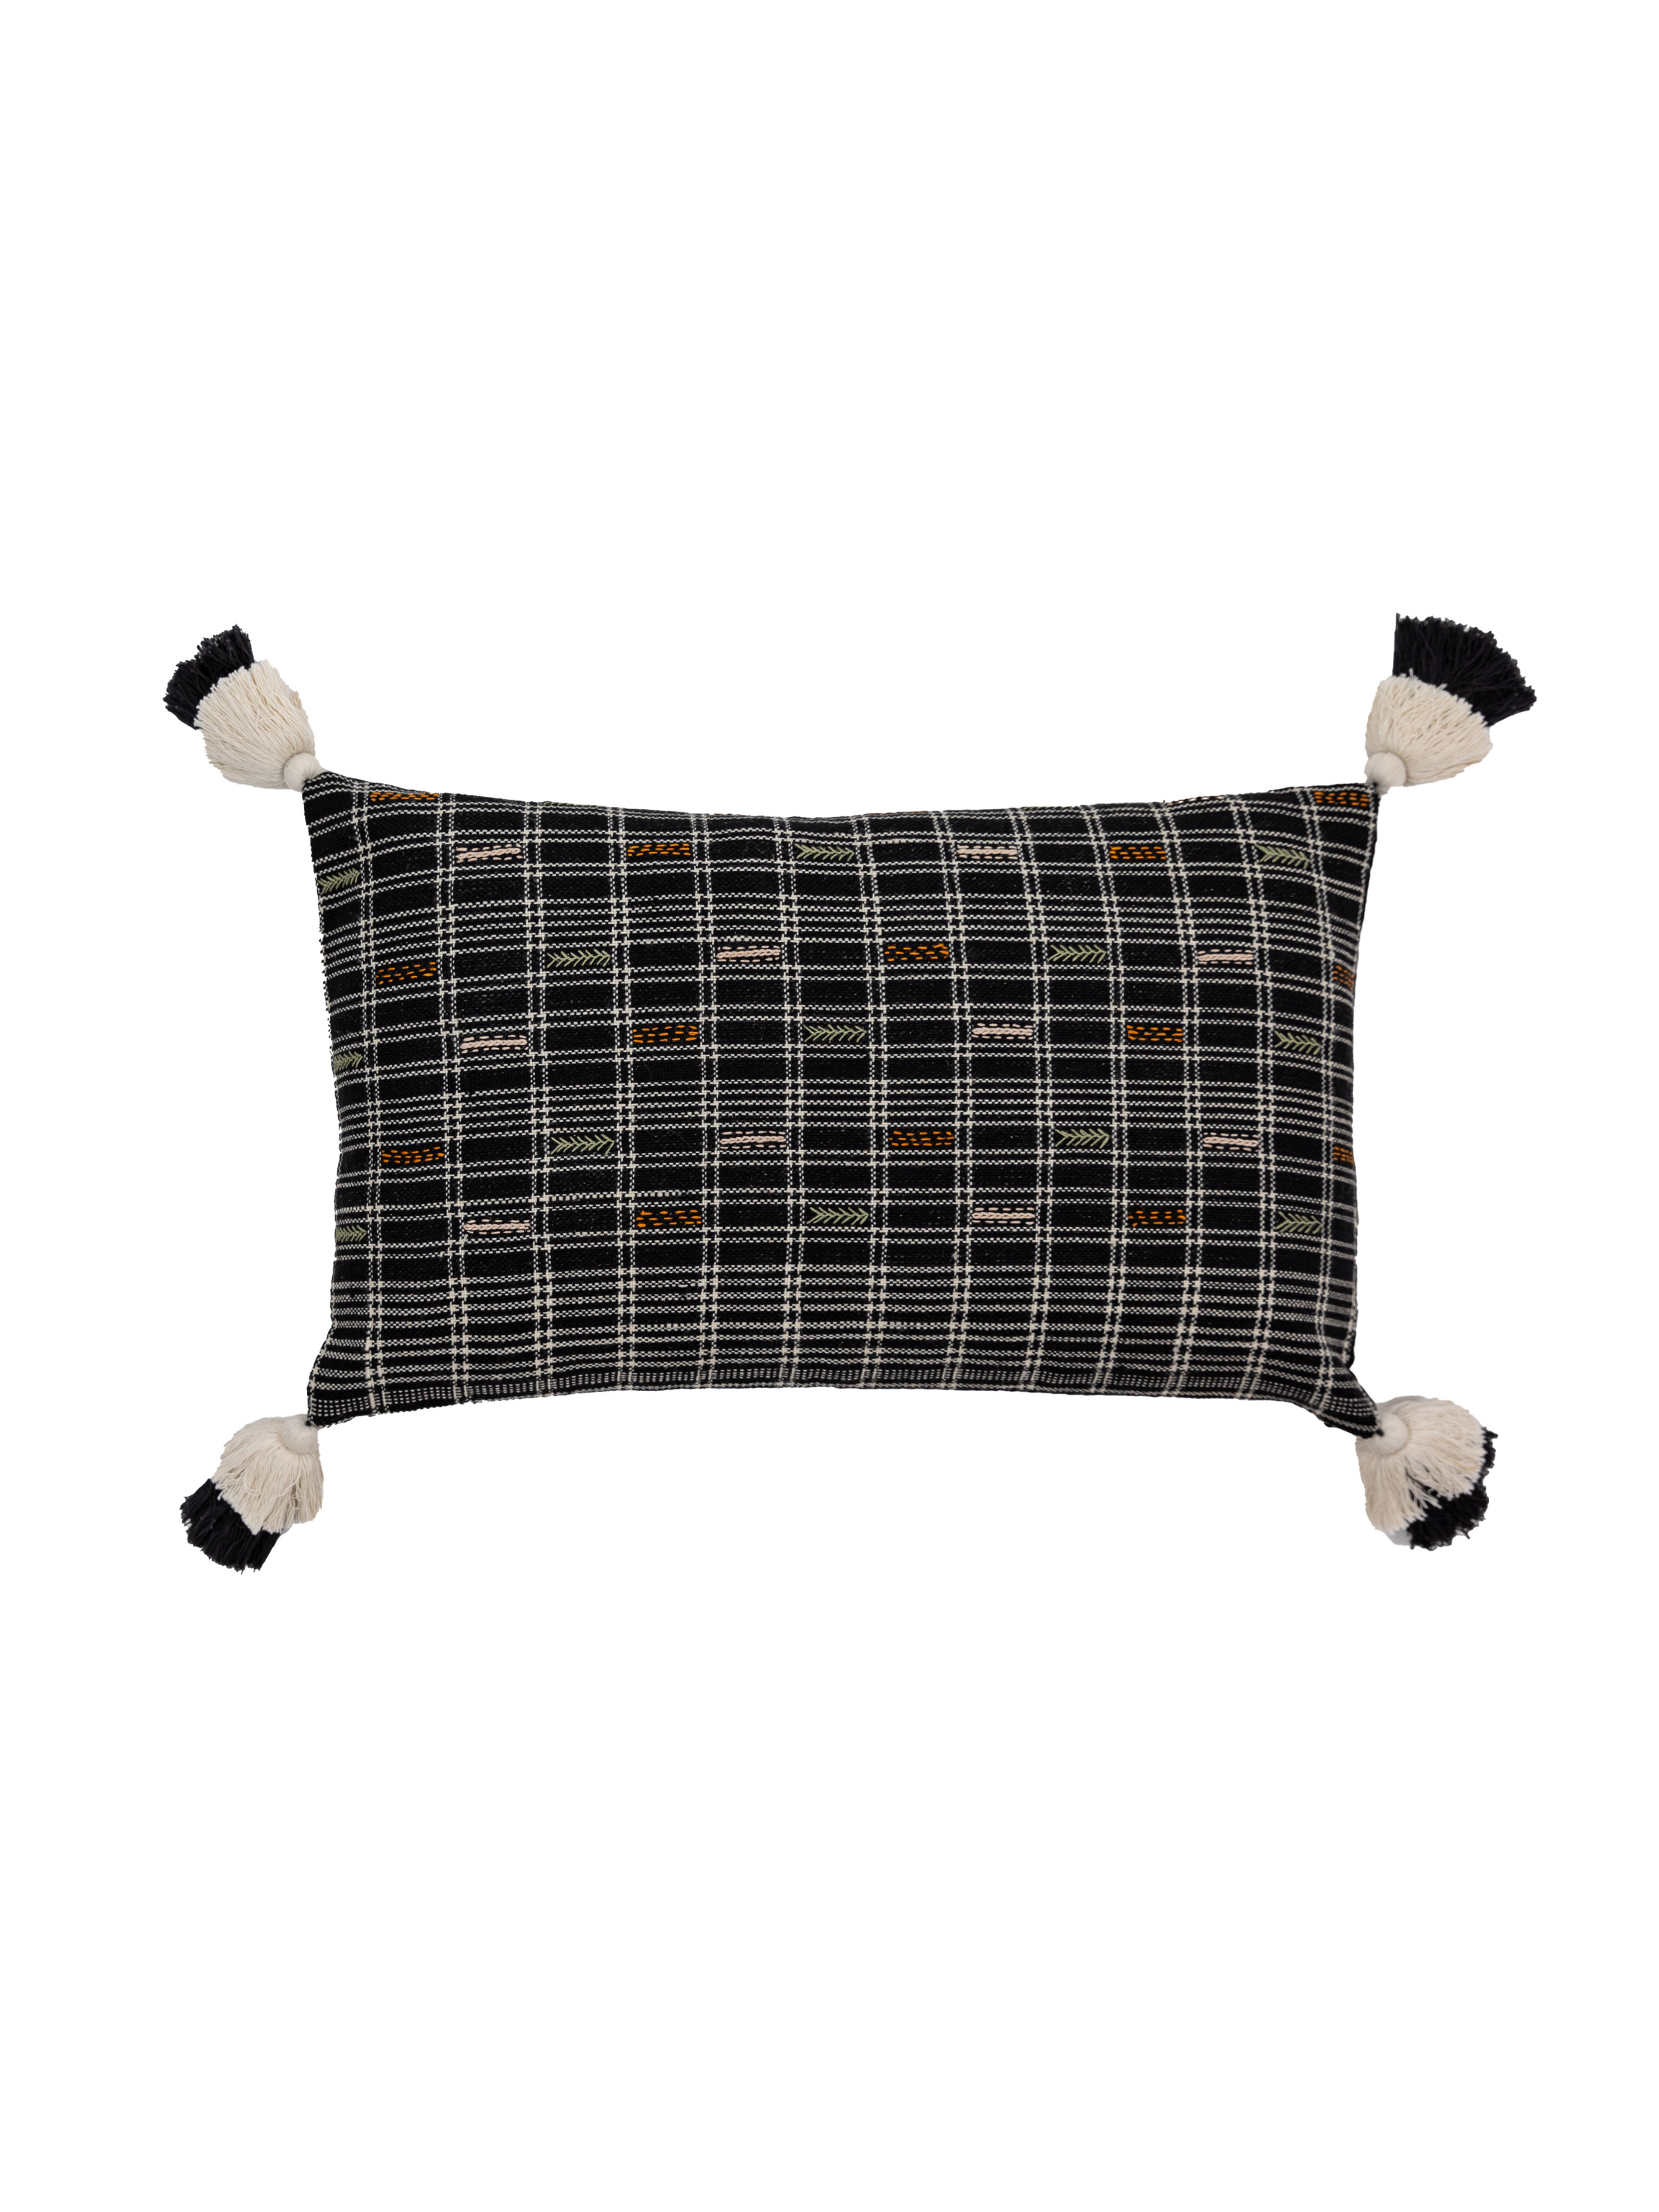 Charcoal Plaid Woven Wool Pillow Cover